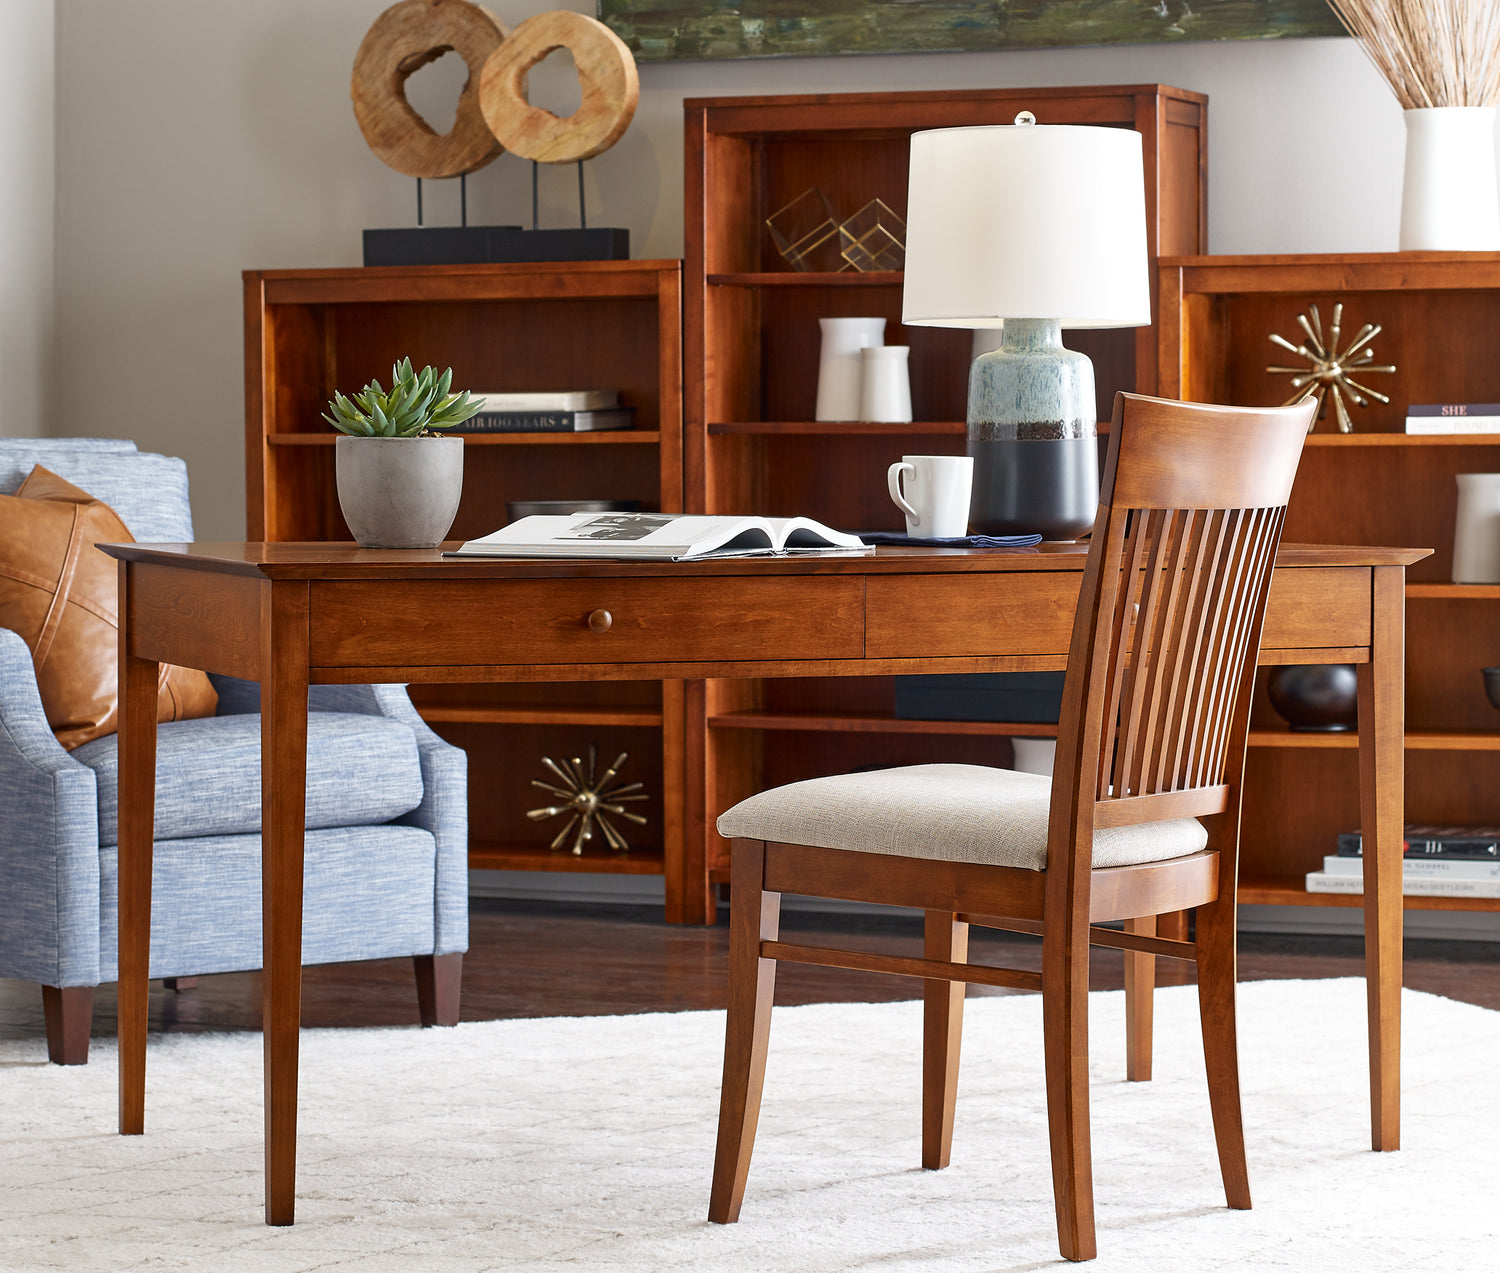 Origins by Stickley Gable Road office desk, chair, and bookcases